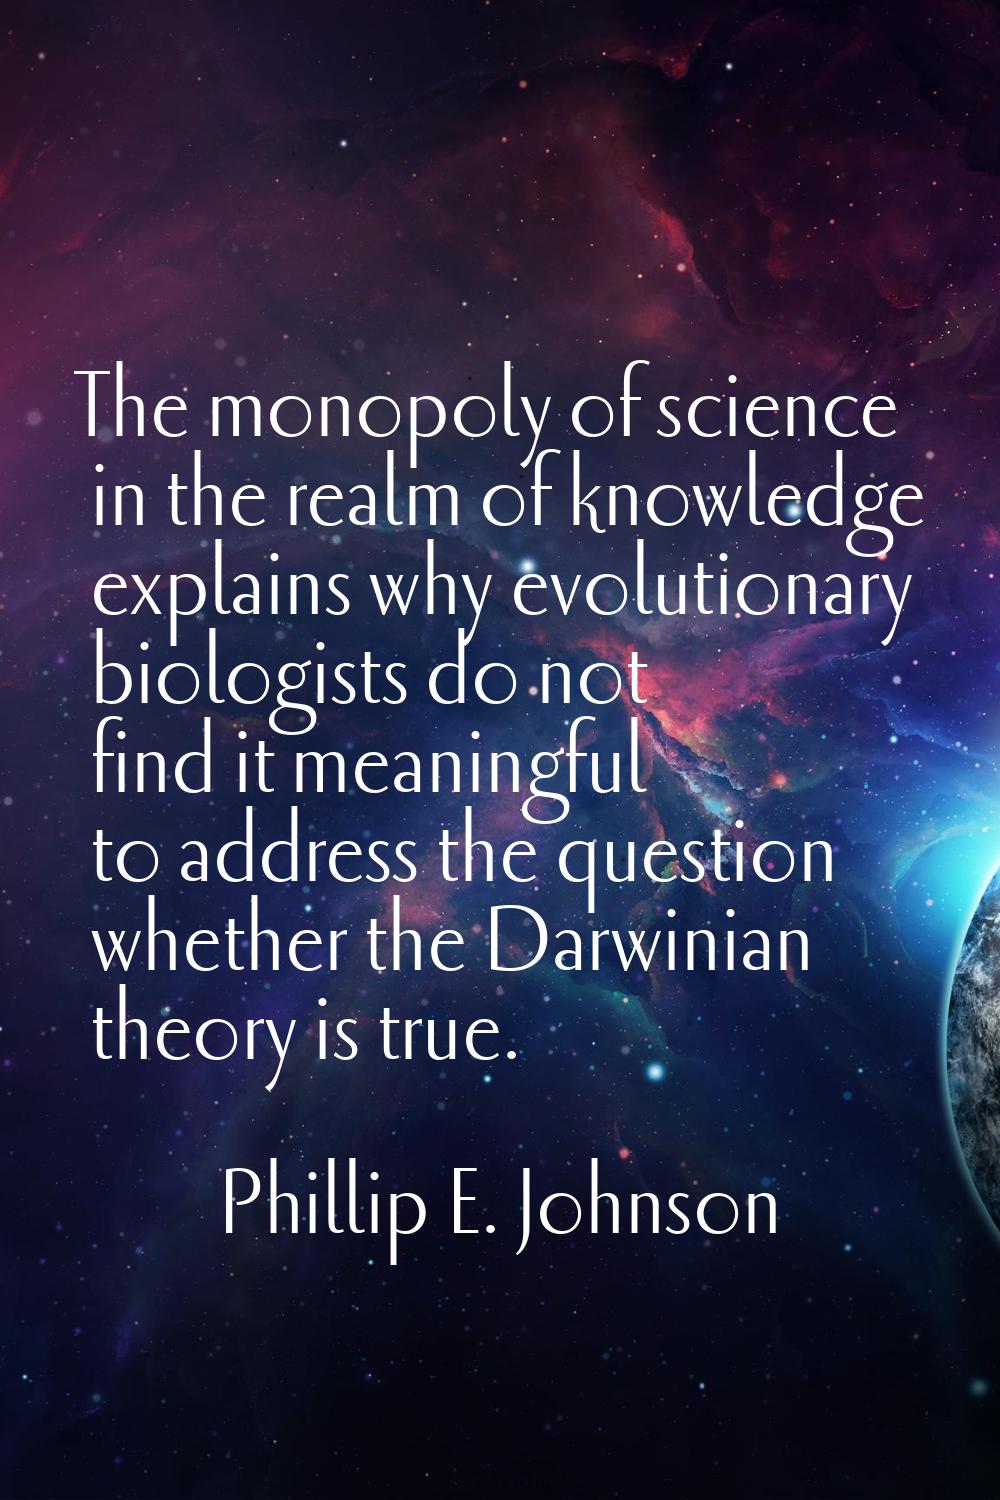 The monopoly of science in the realm of knowledge explains why evolutionary biologists do not find 